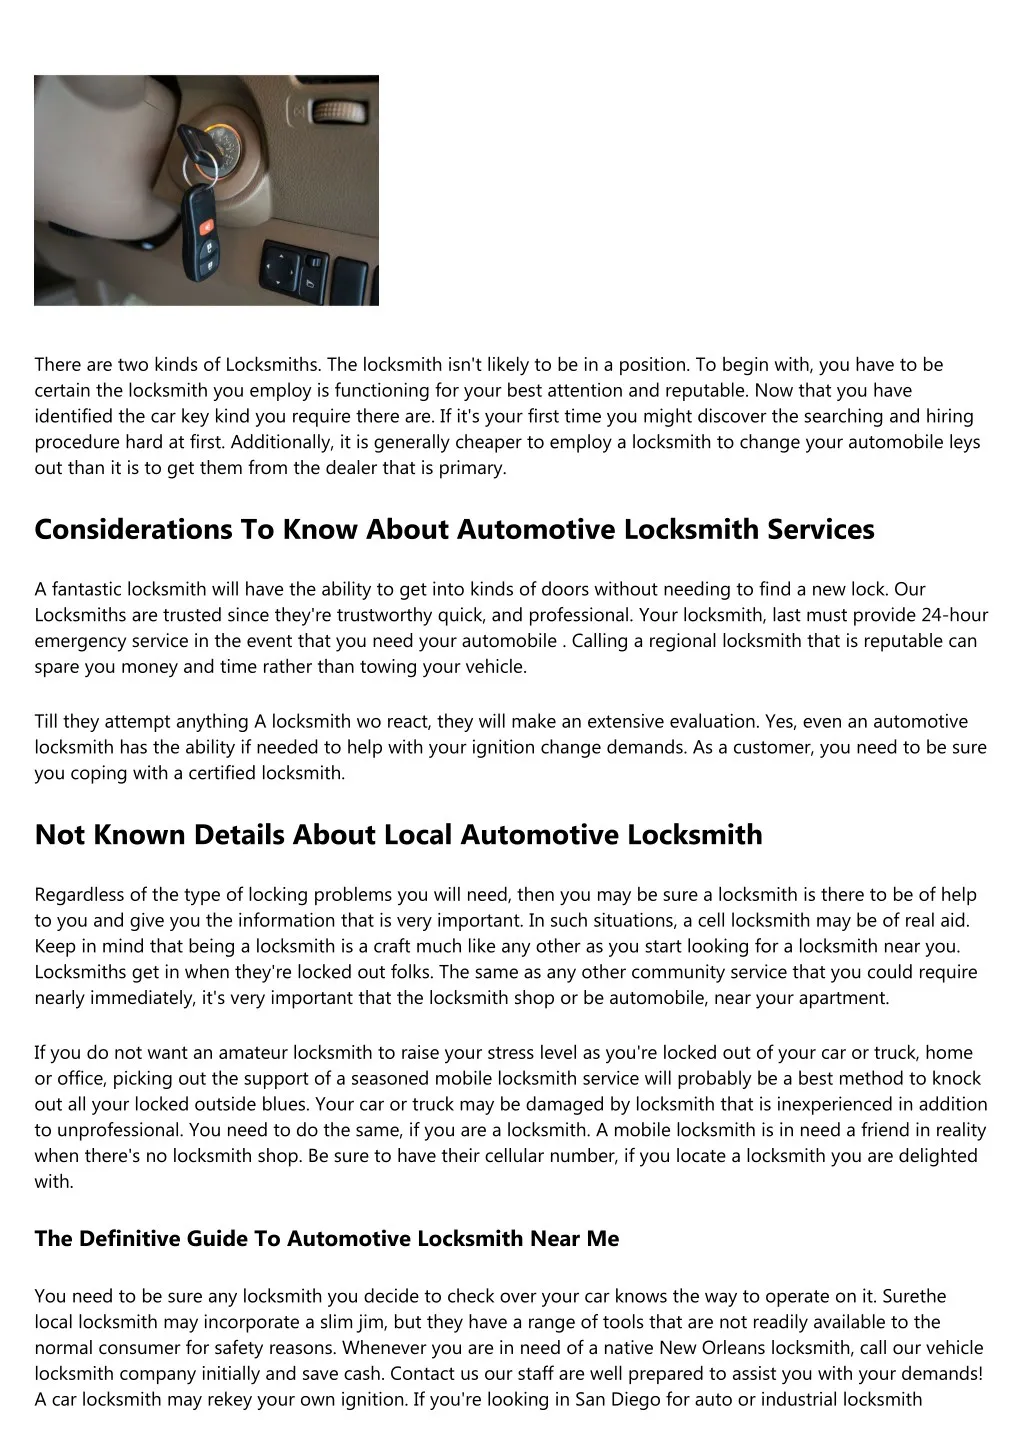 there are two kinds of locksmiths the locksmith